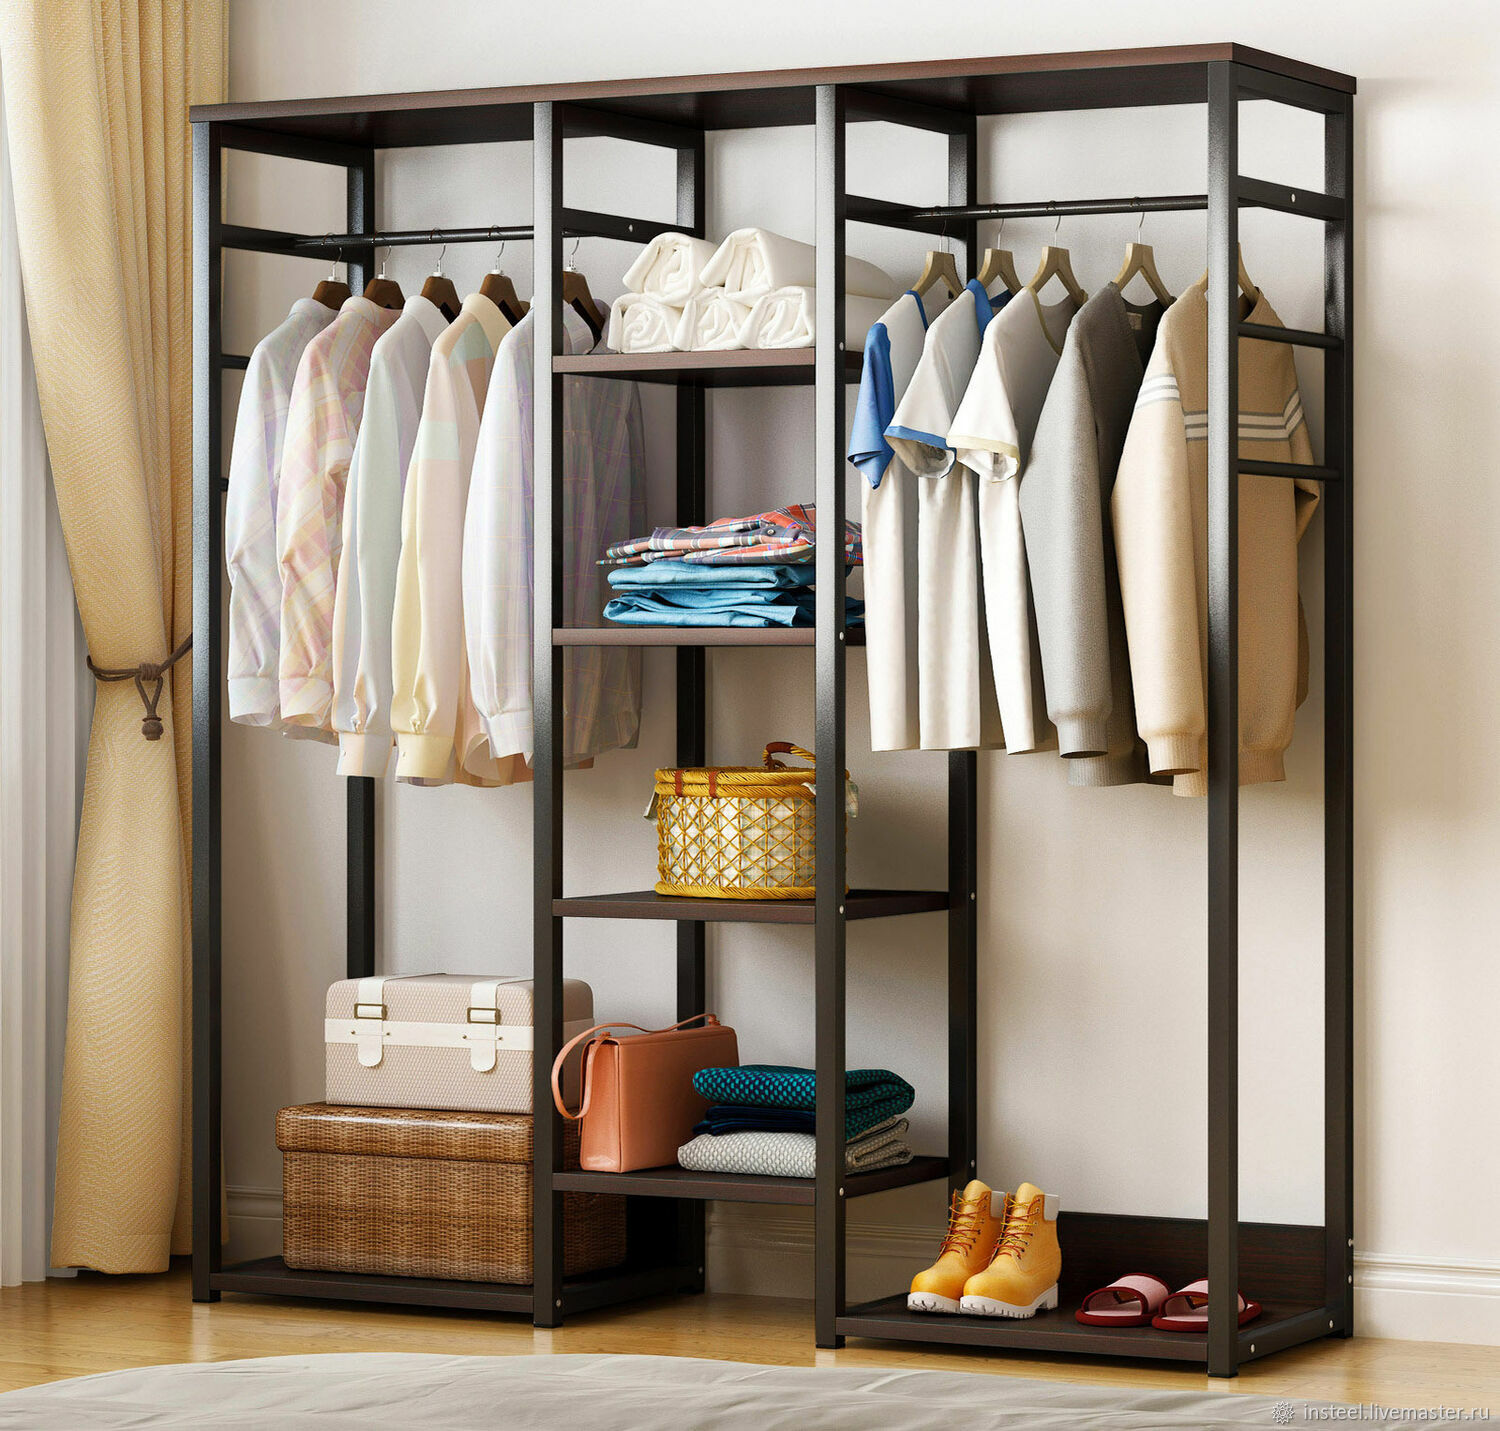 Open Wardrobe with clothes